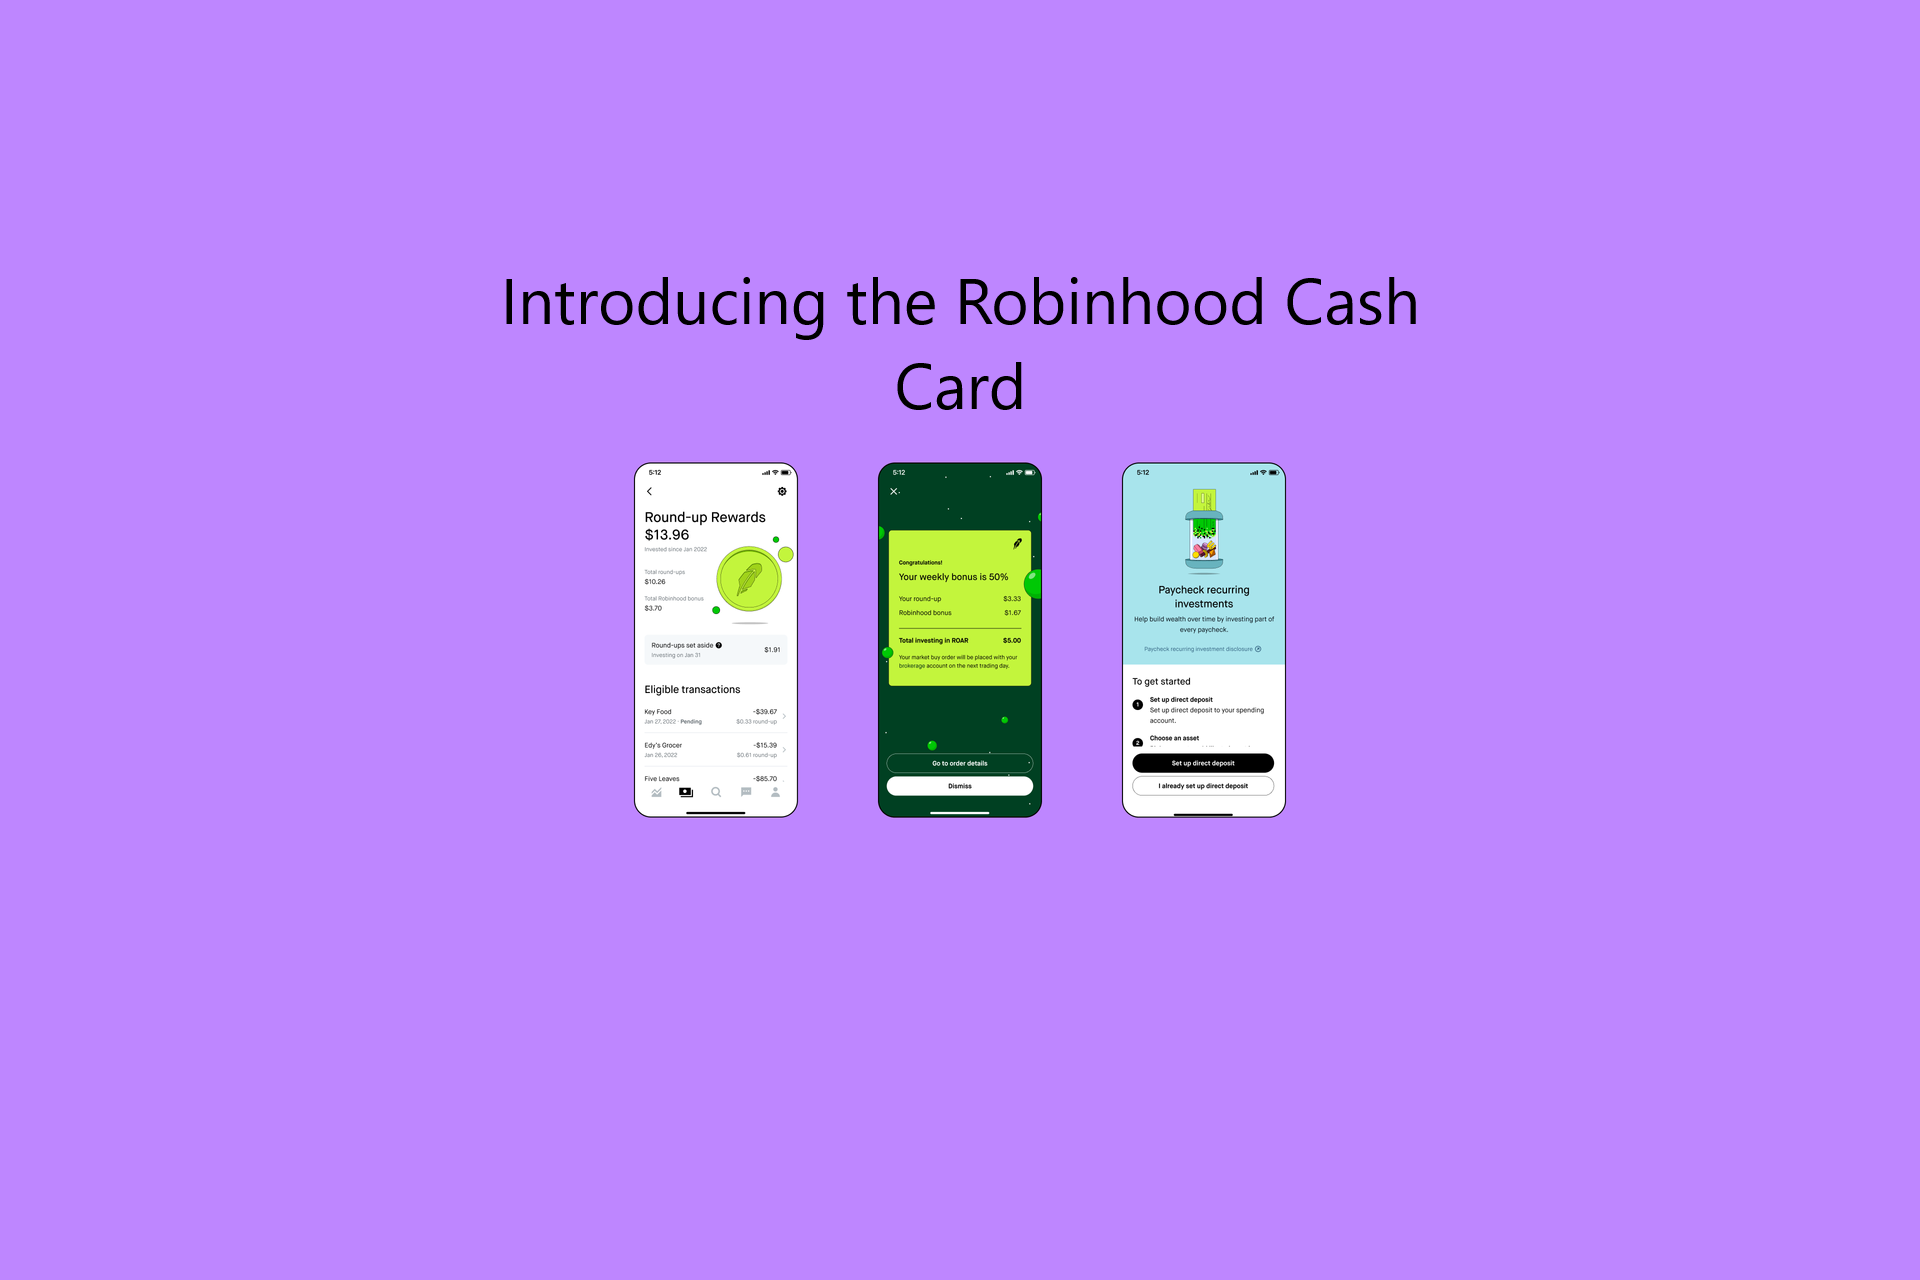 invest-rewards-with-the-new-robinhood-cash-card